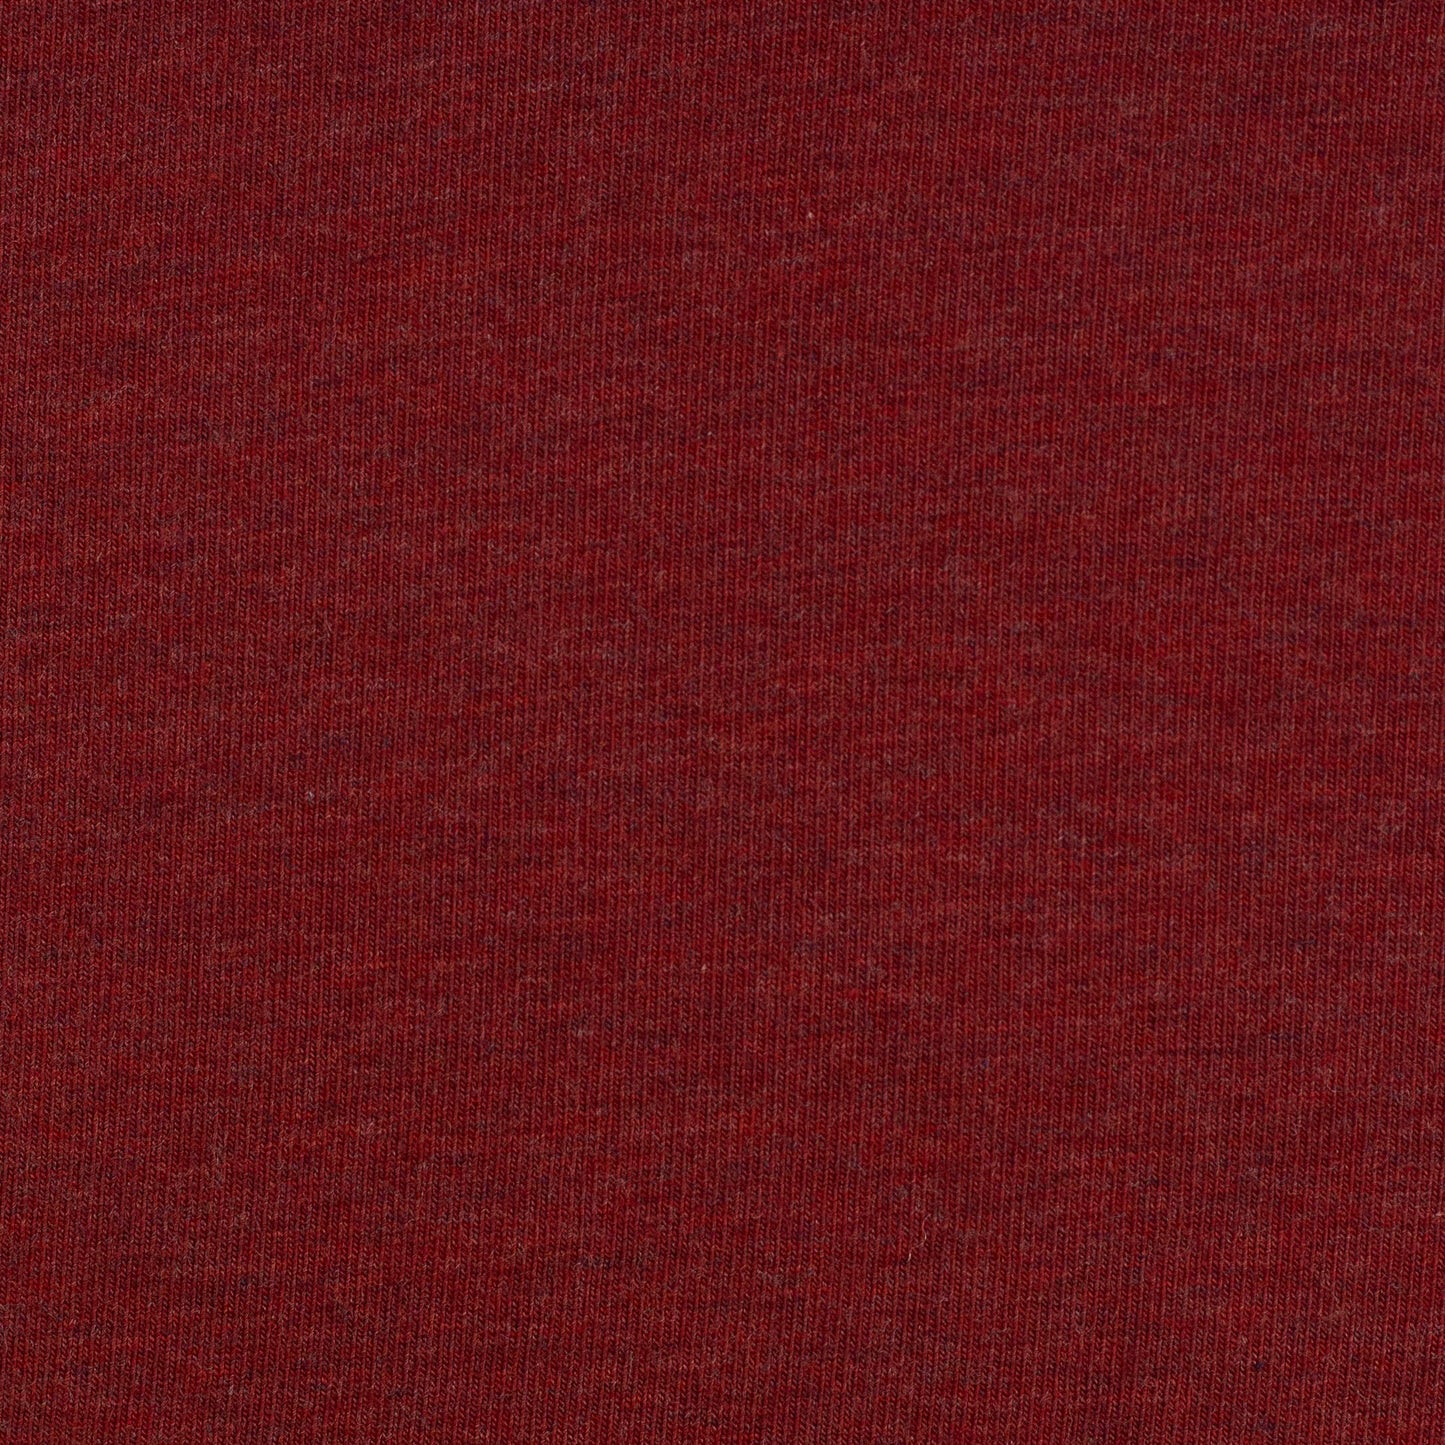 Swafing - Melange - Dark Burgundy - Euro-ribbing - Jersey - French Terry - Fleeced French Terry - 1338 - Little Rhody Sewing Co.